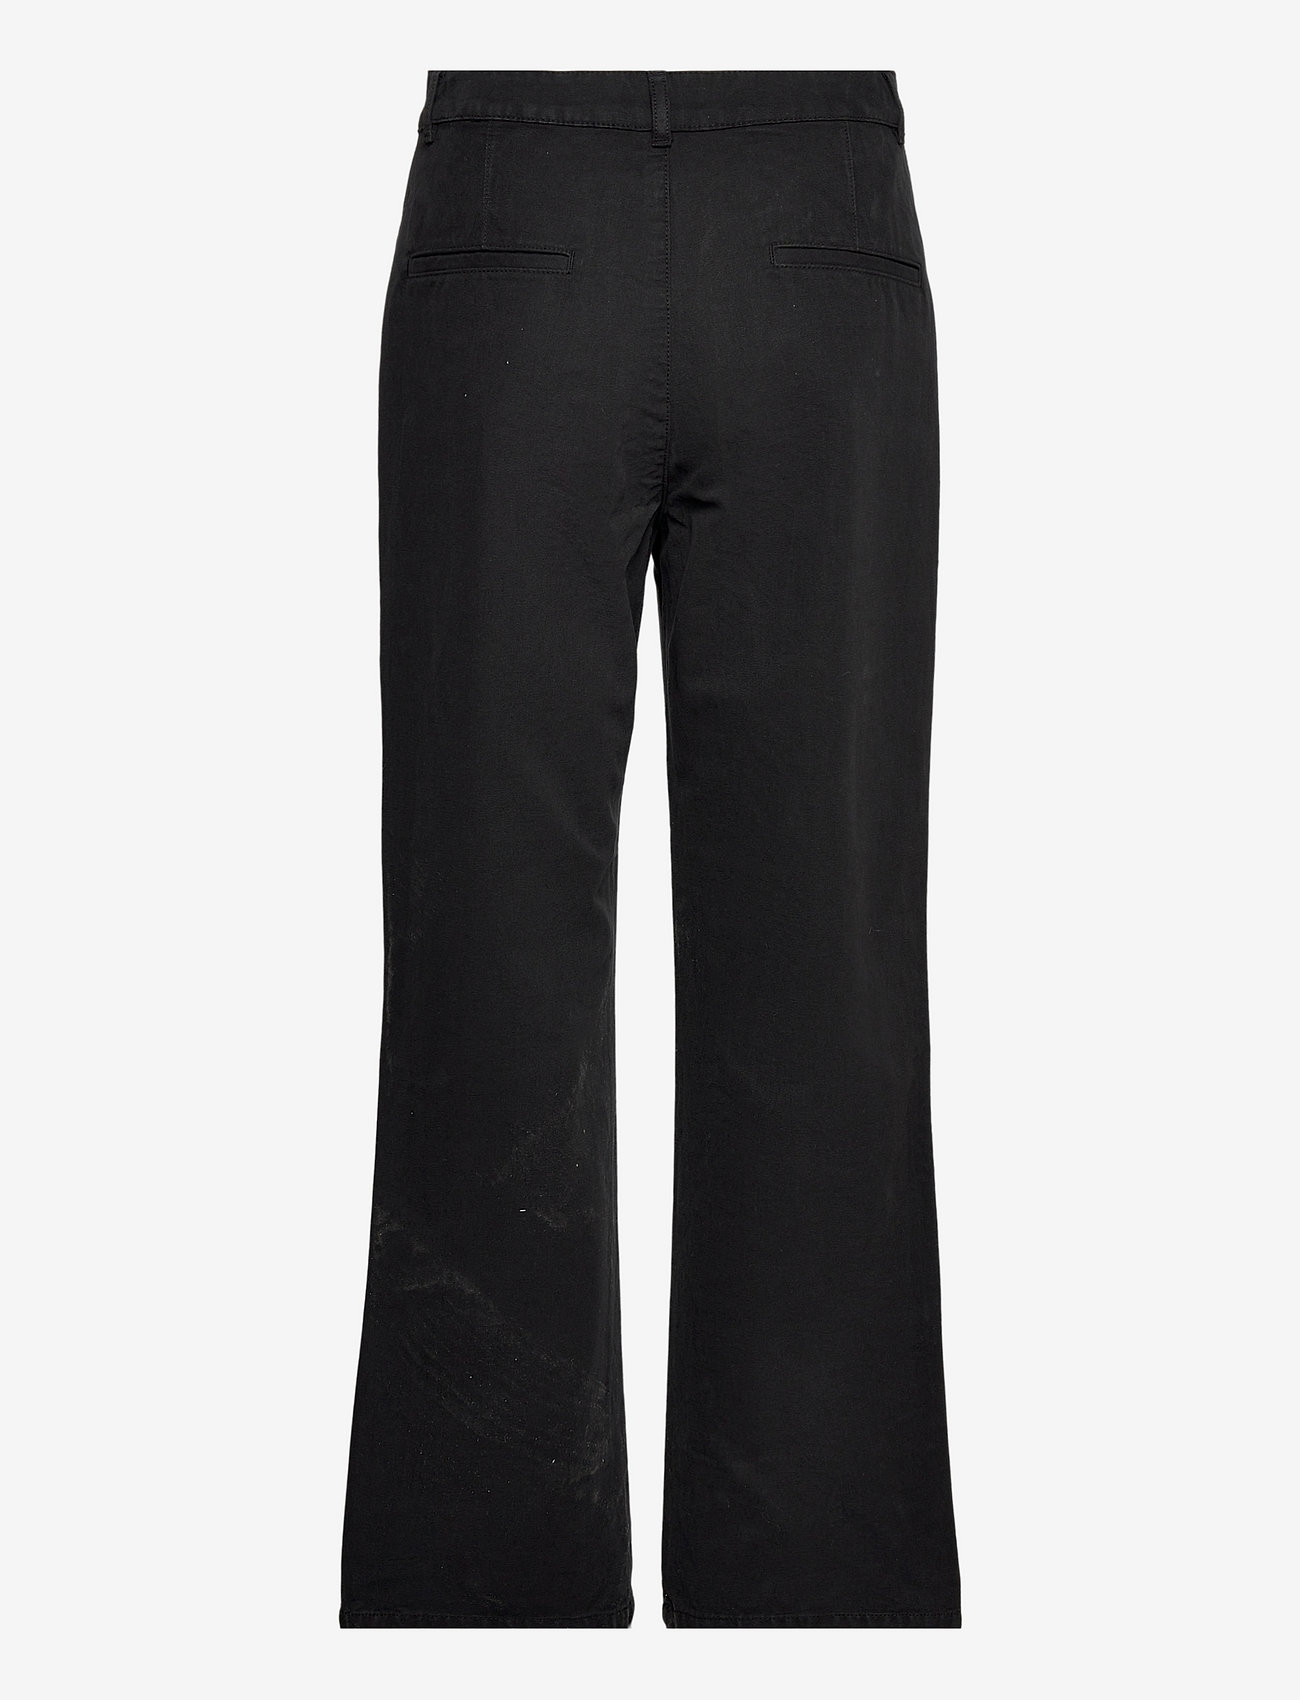 Hope - Cropped Straight Leg Trousers - chinot - black - 1